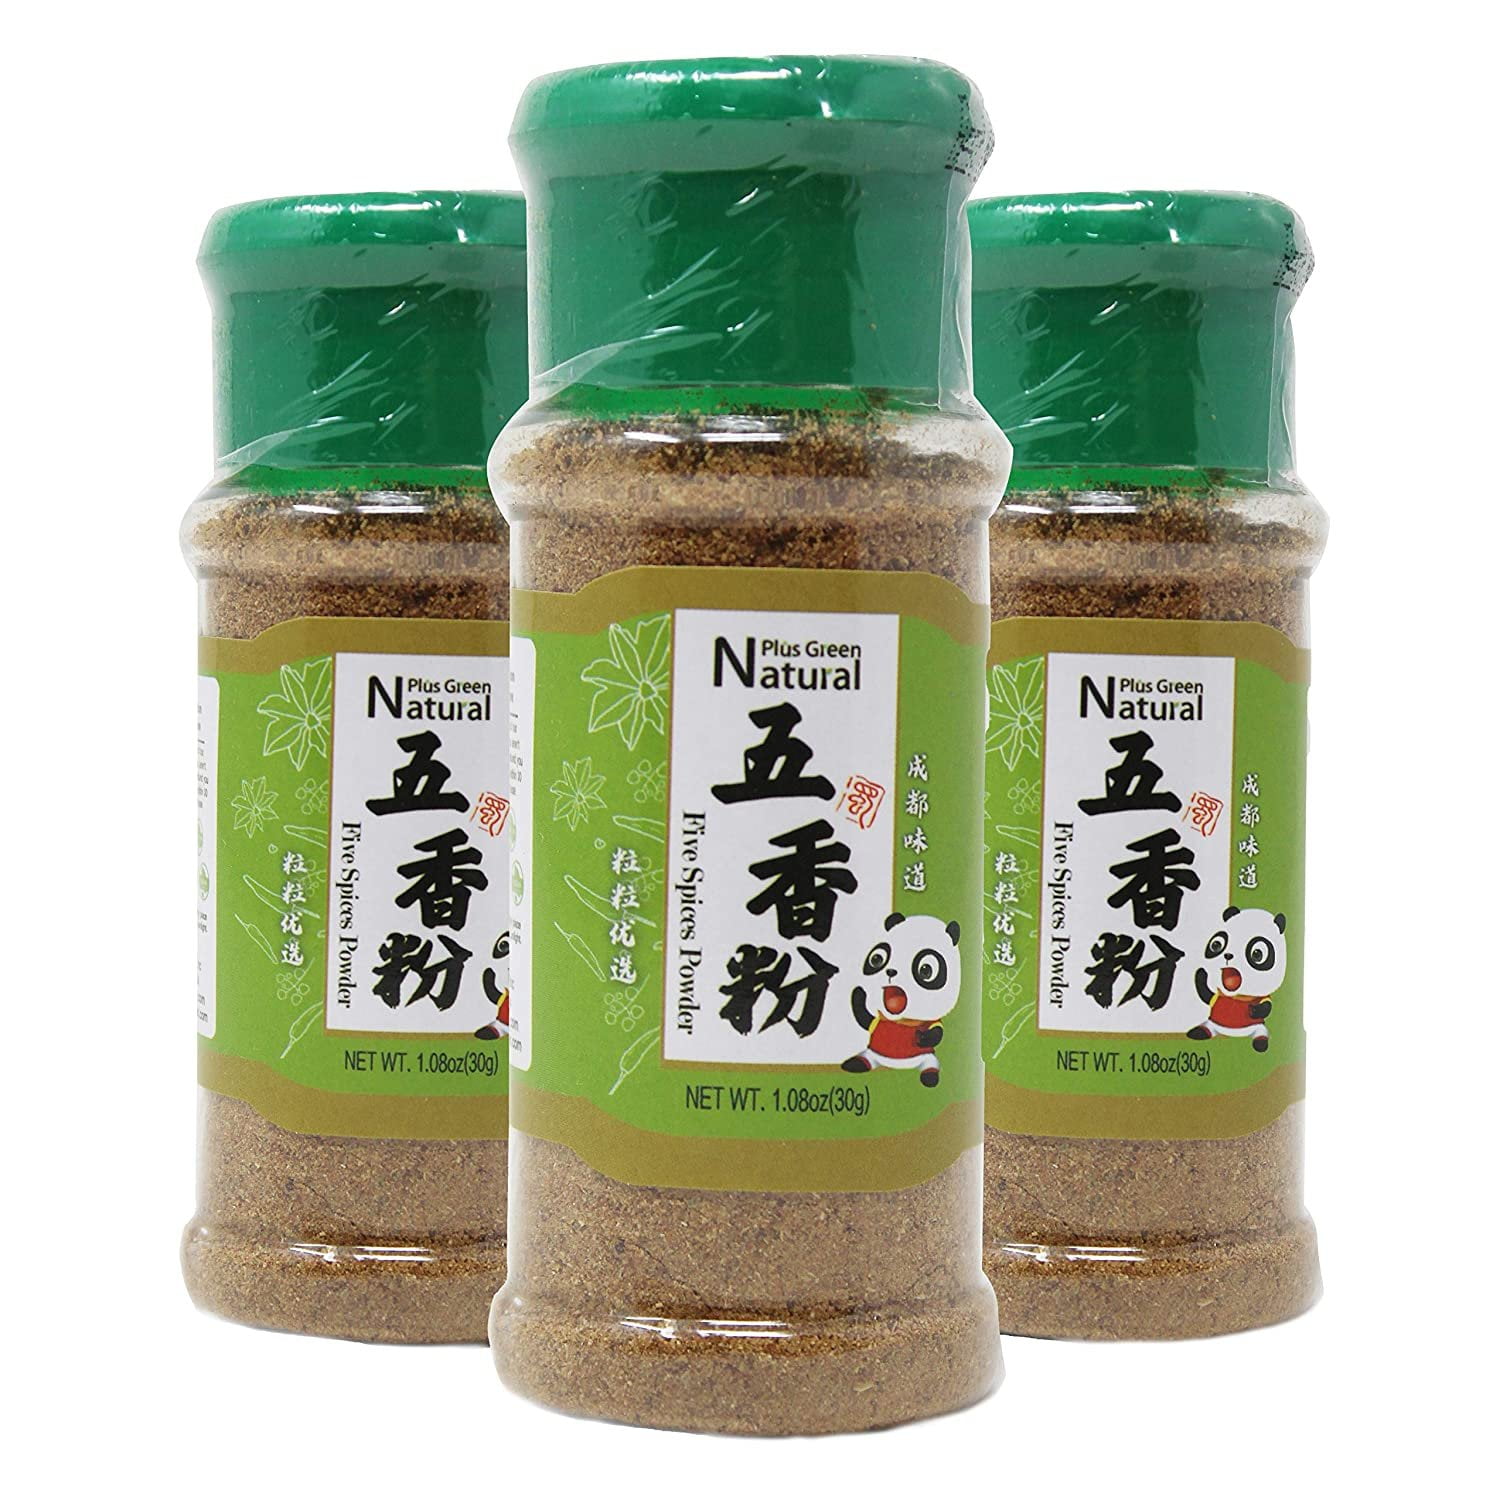 Homemade Chinese Five Spice Powder (五香粉) - Red House Spice